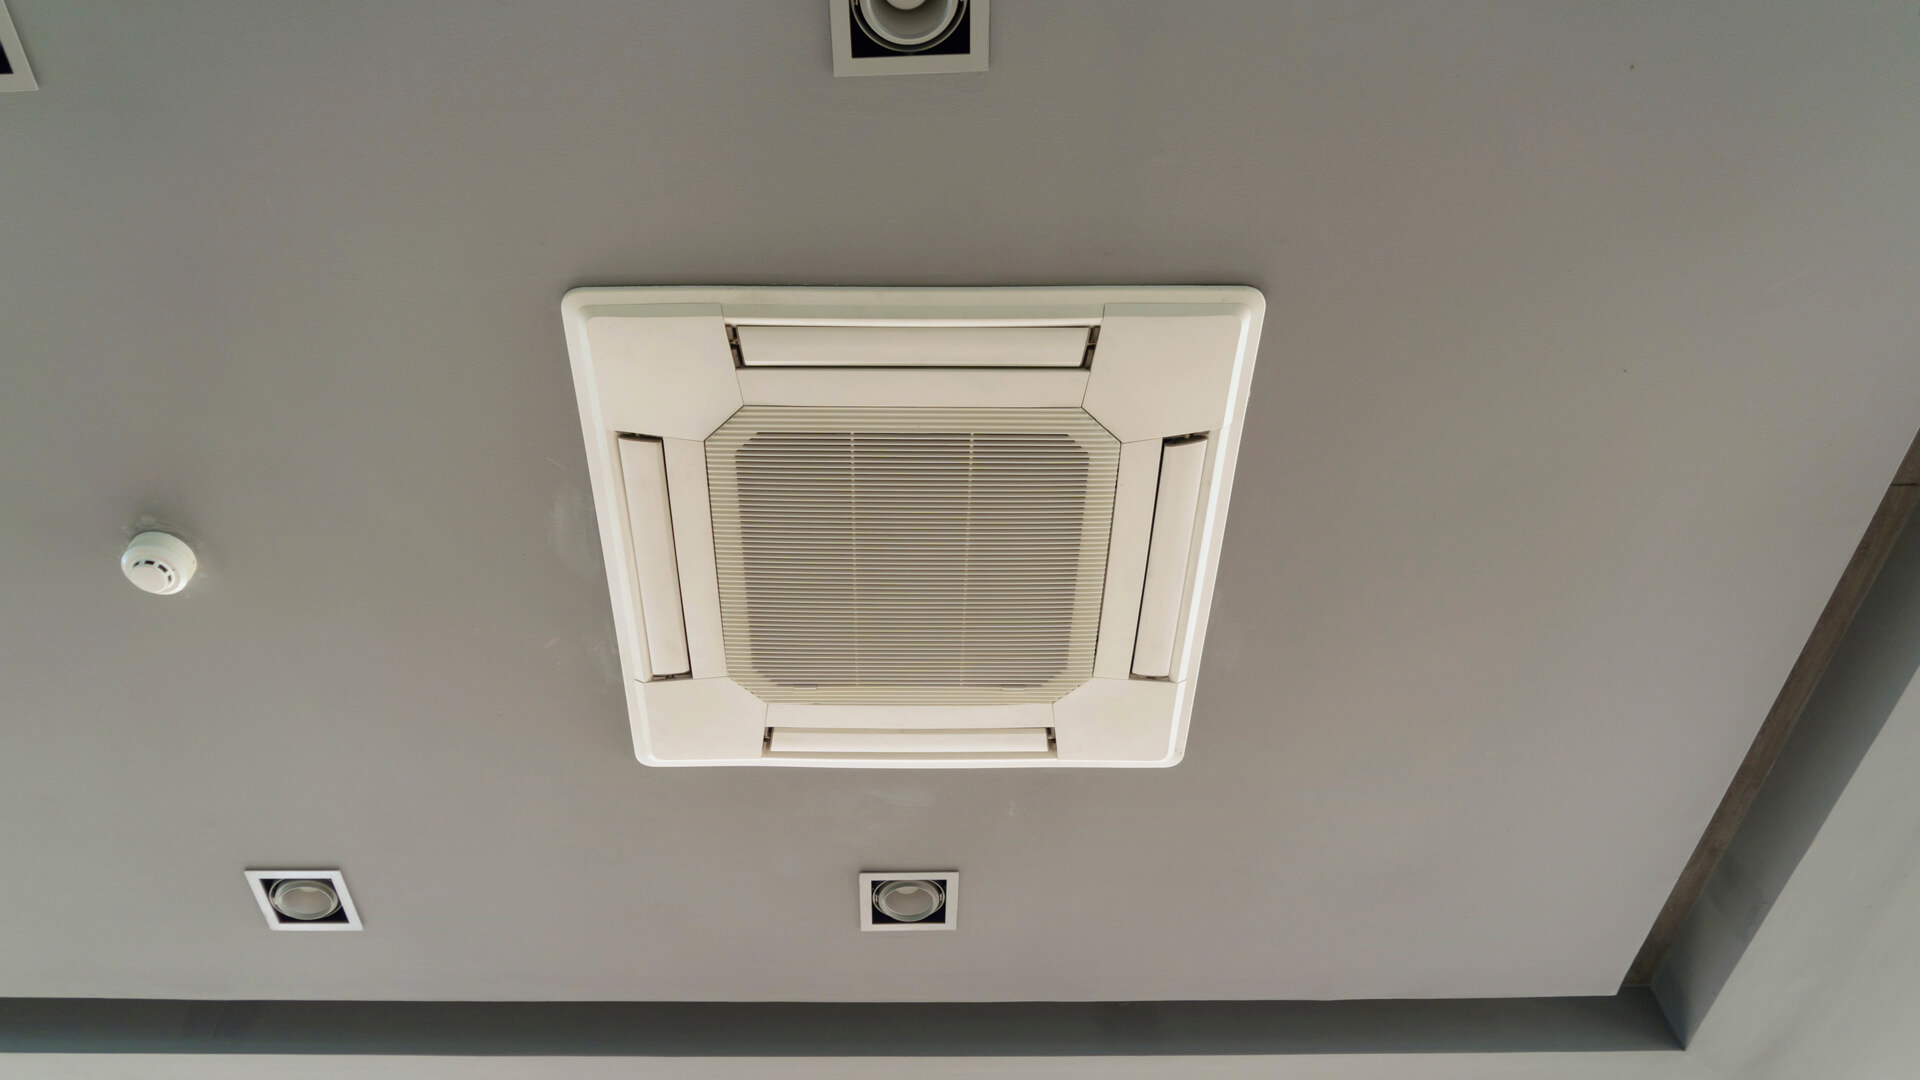 ceiling mounted cassette type air conditioner in b 2022 05 31 06 33 21 utc